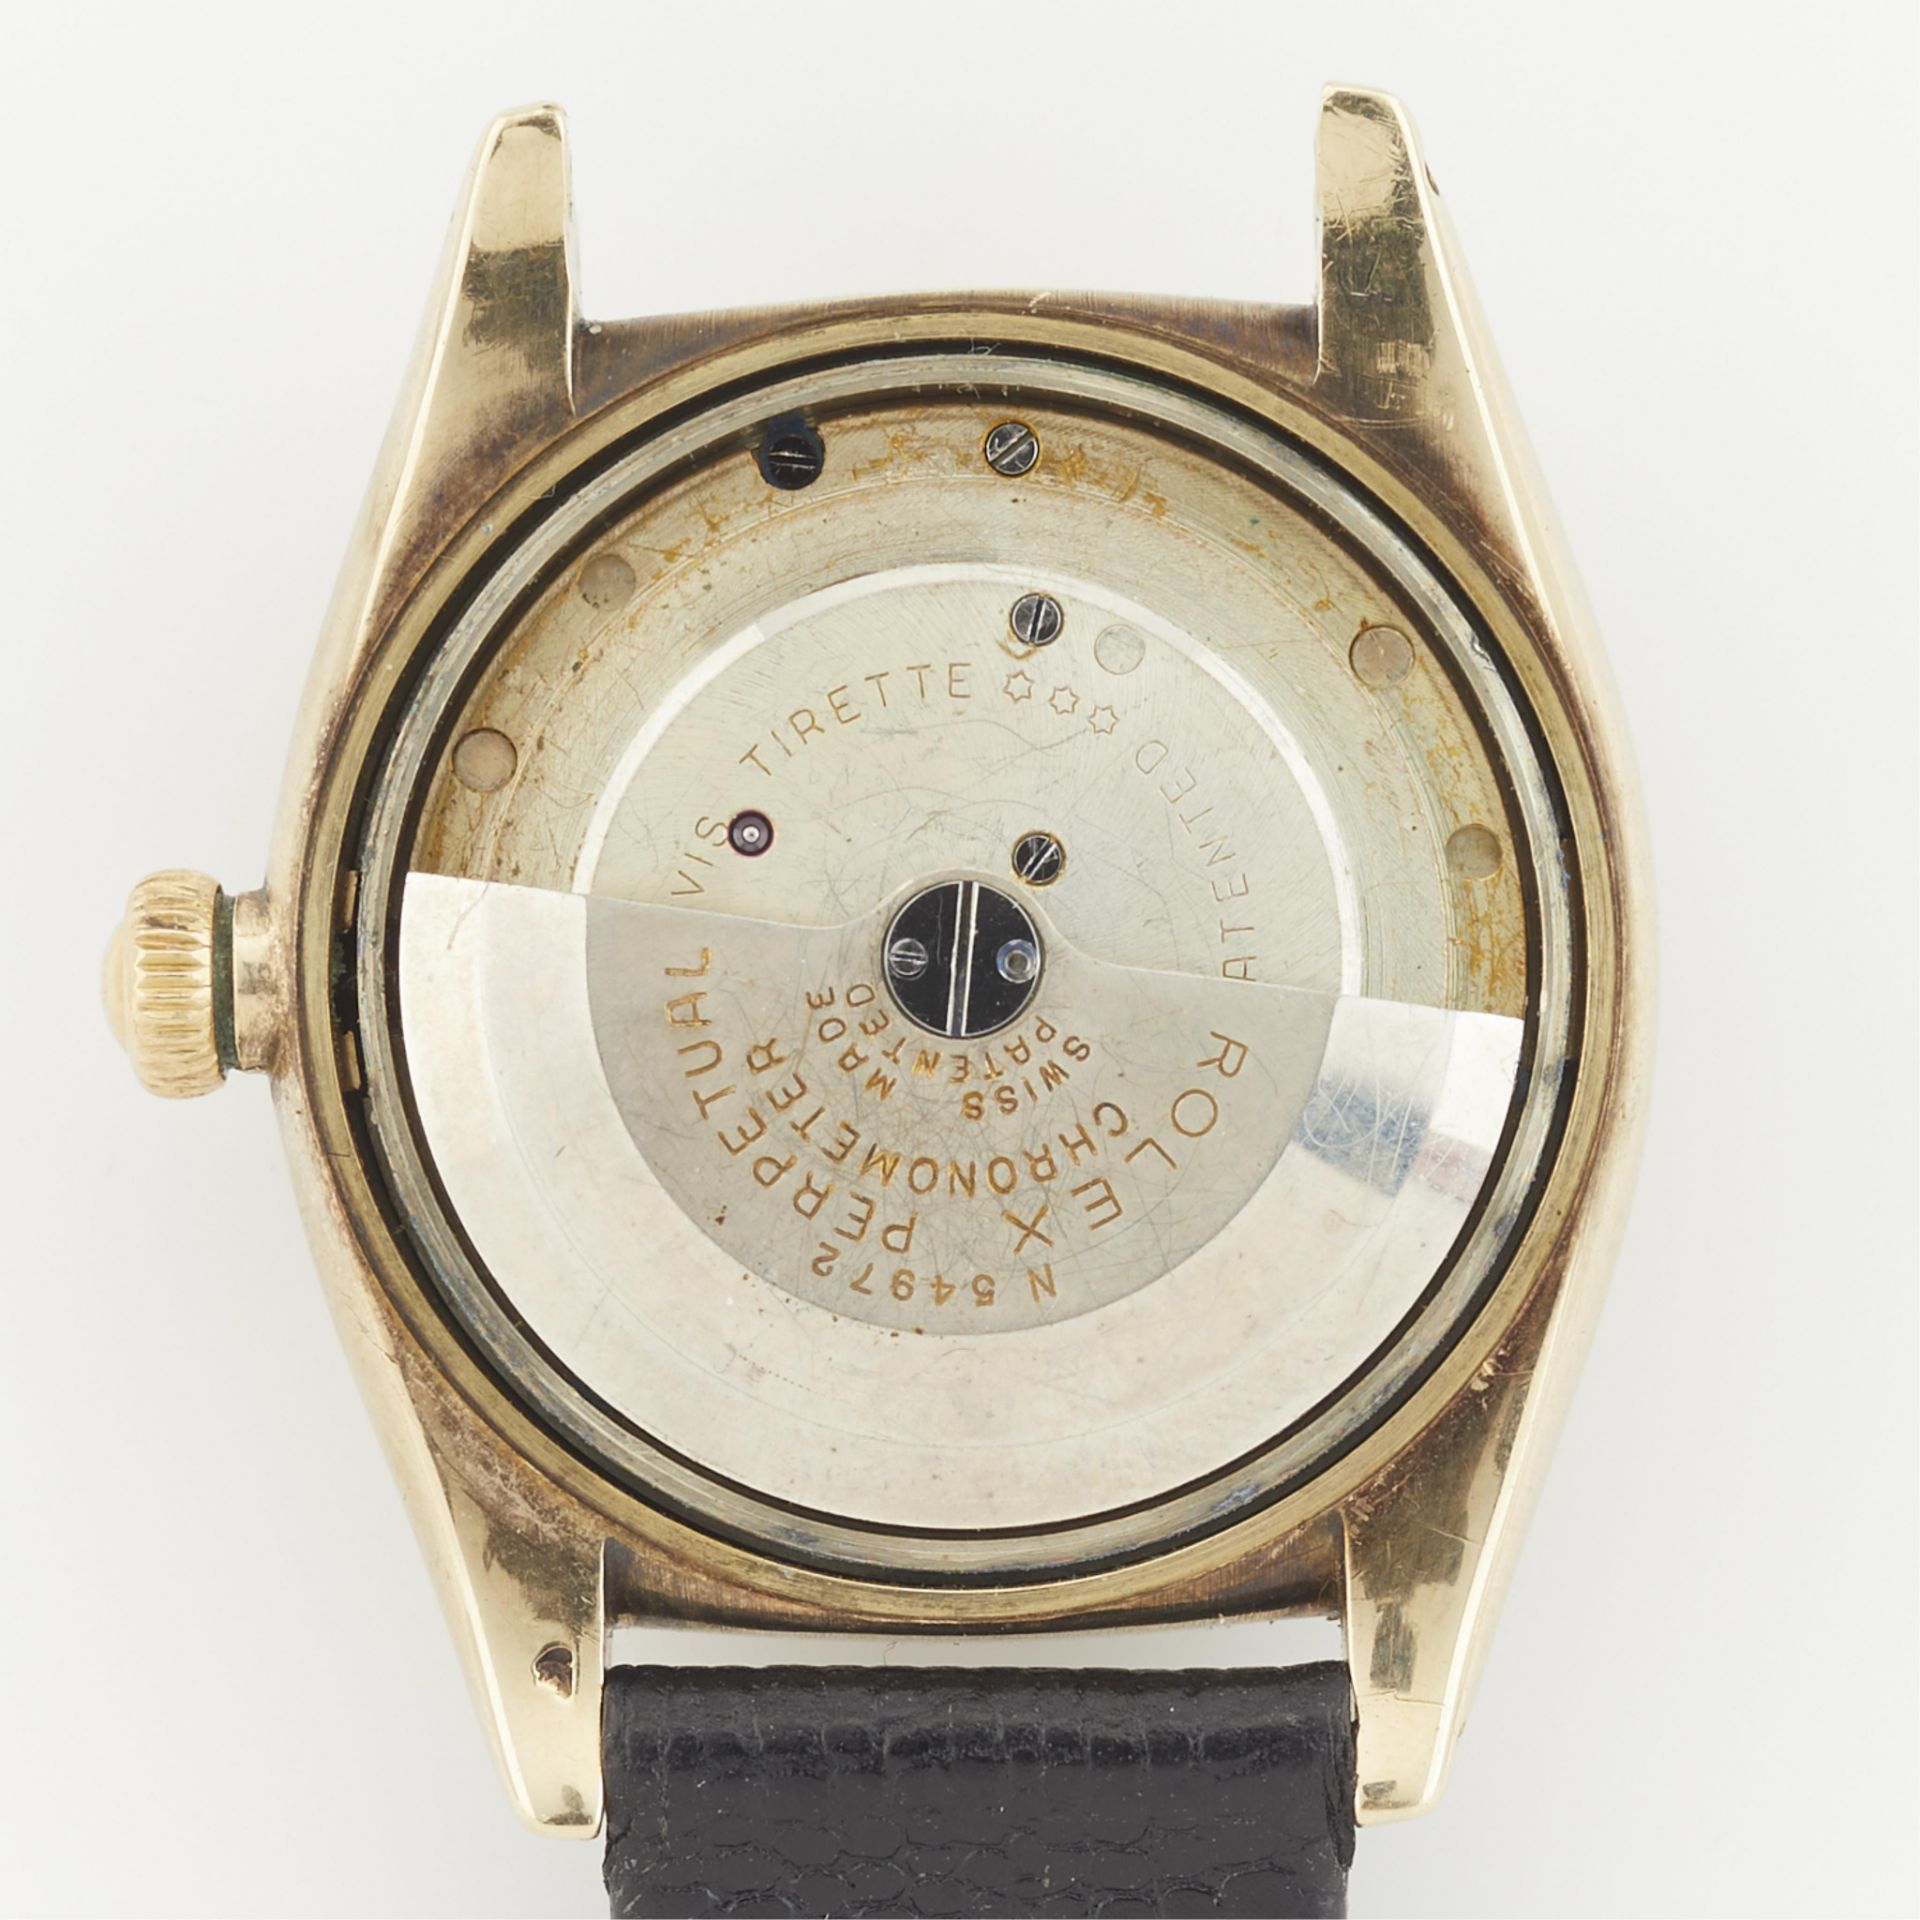 14k Rolex Oyster Perpetual 4777 Bubble Back - Image 13 of 14